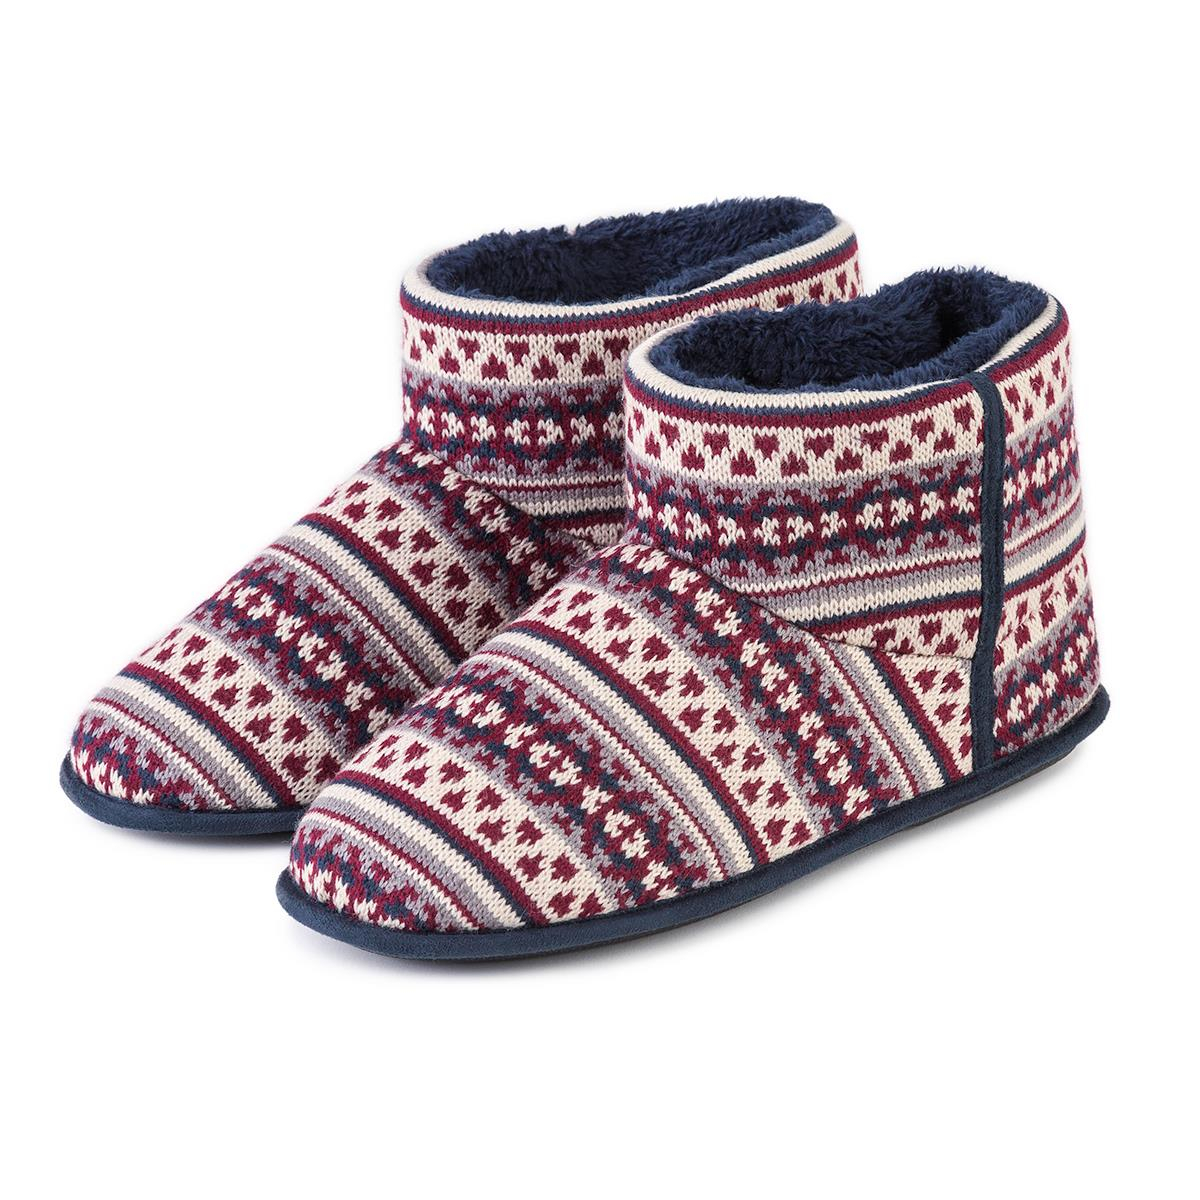 Knitting Patterns For Slipper Boots Totes Mens Fair Isle Knit Booties